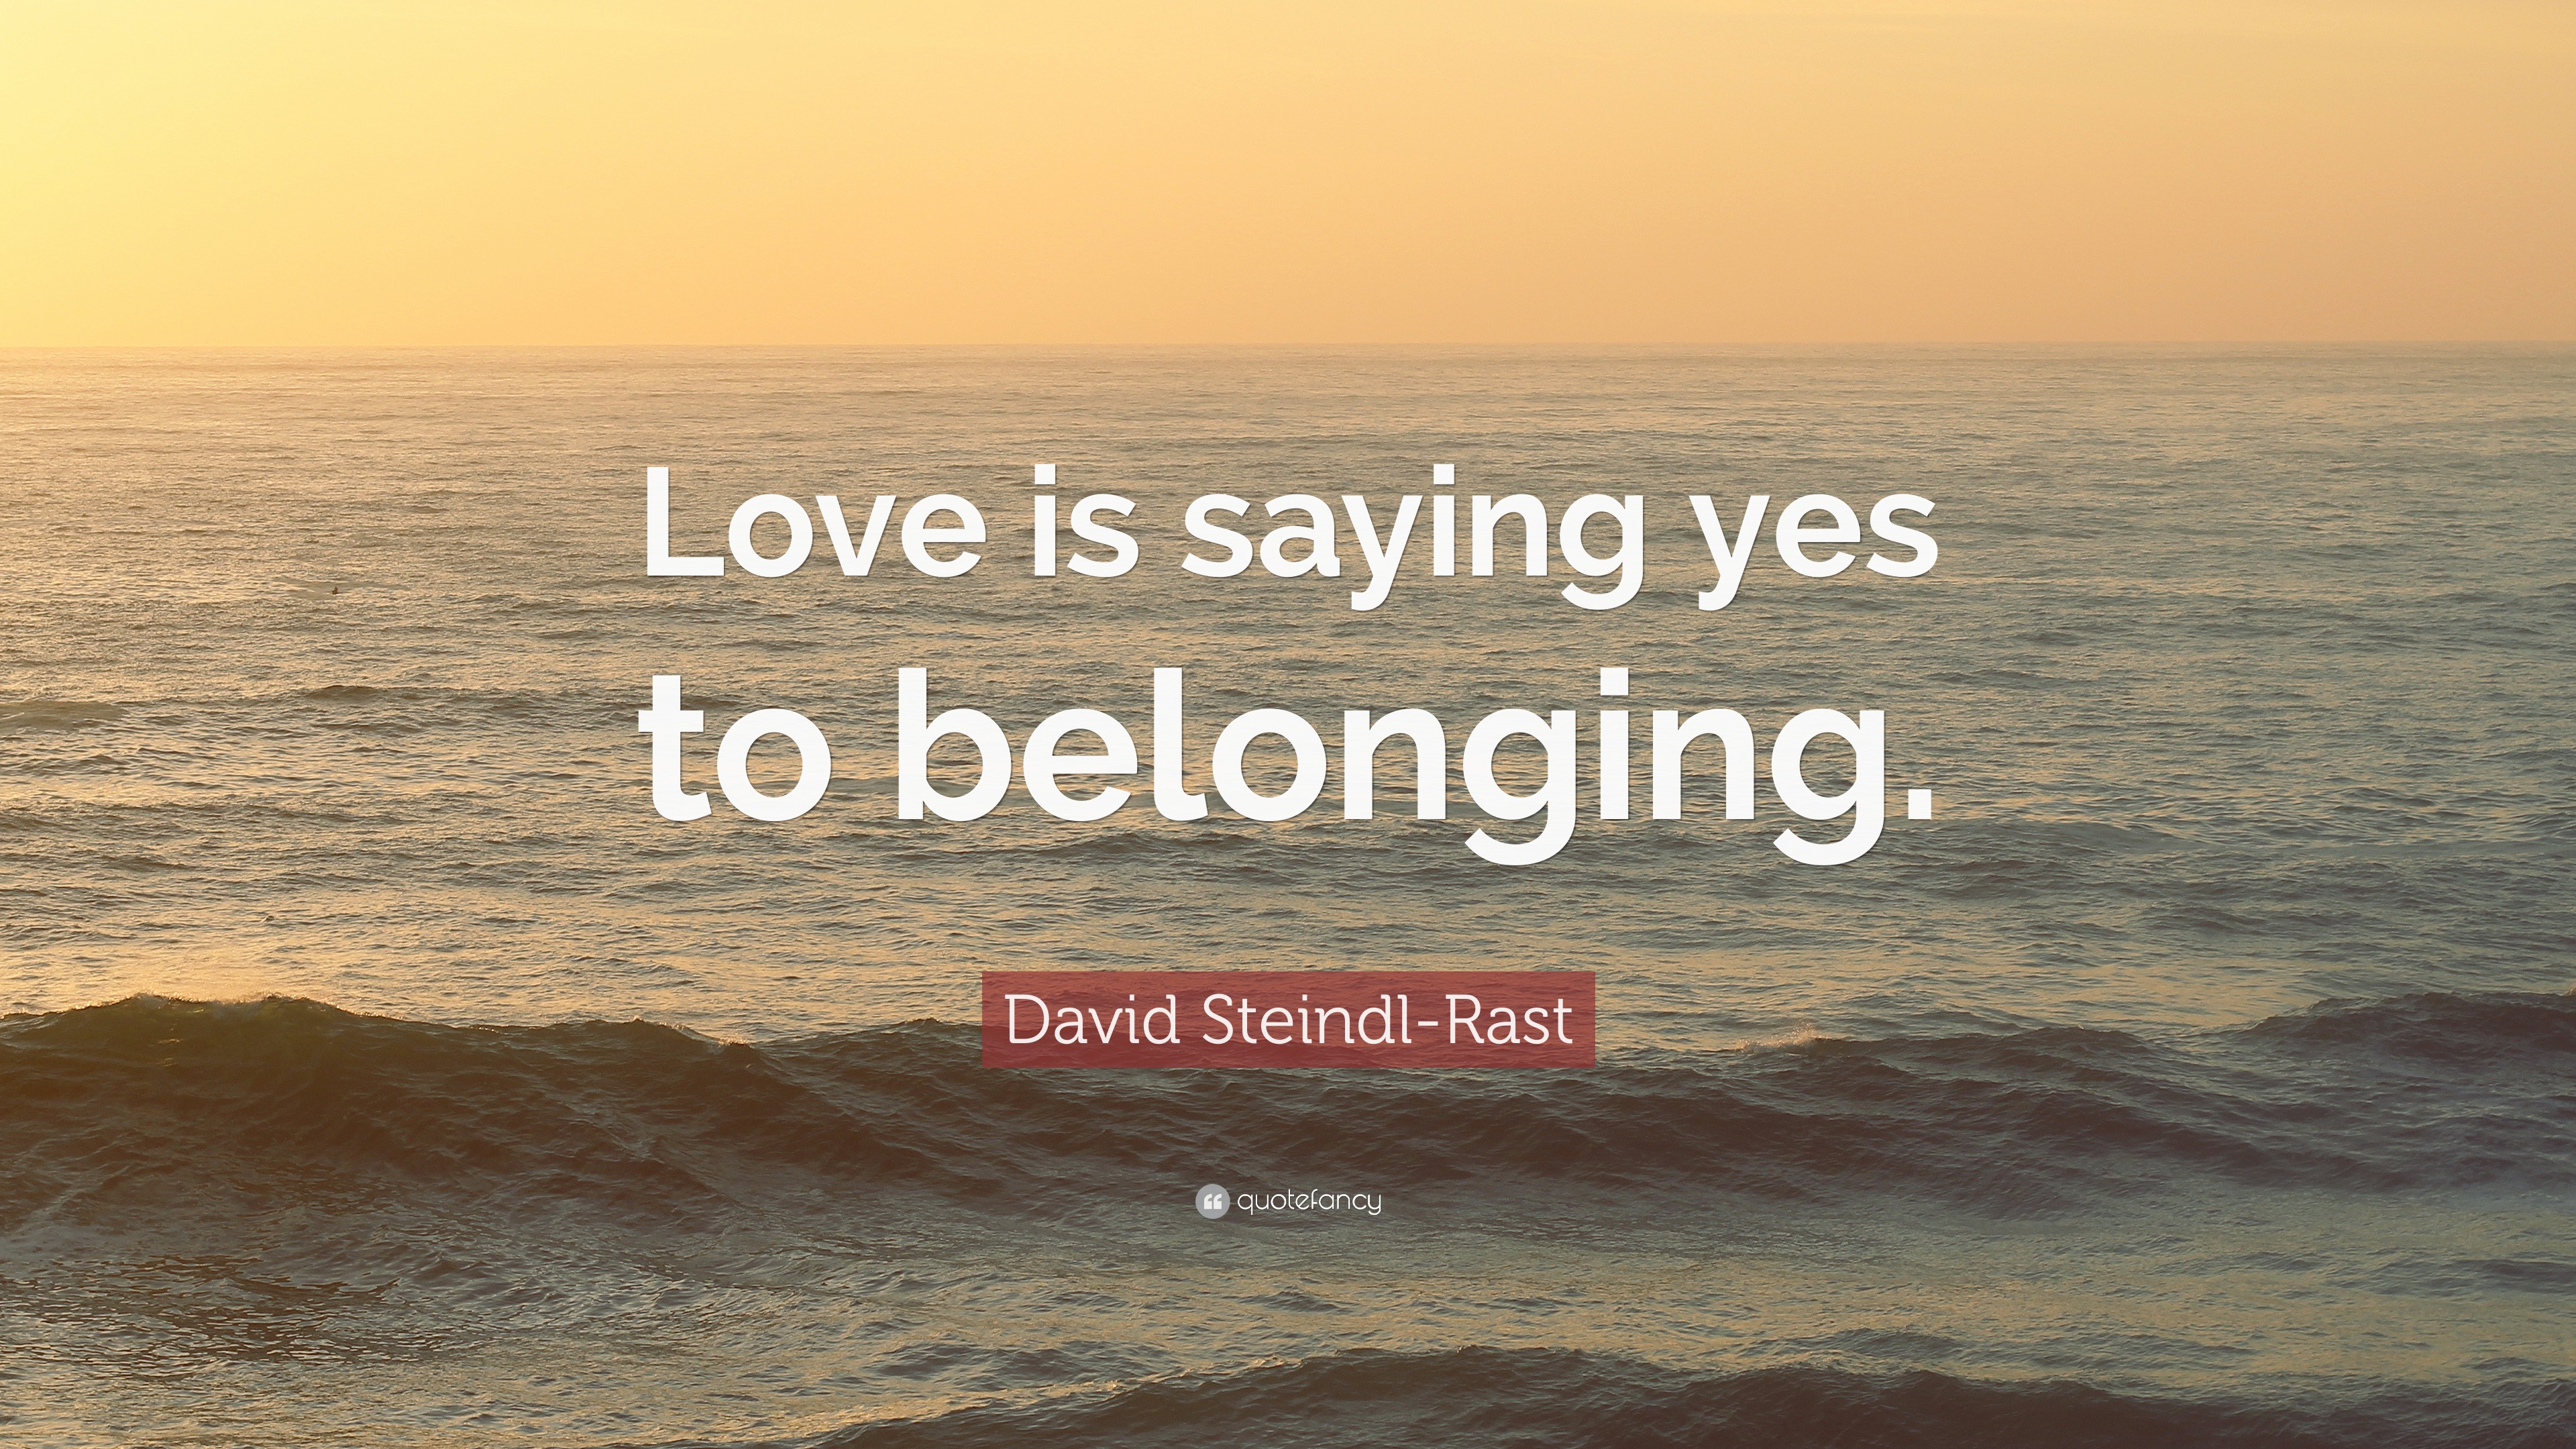 David Steindl Rast Quote “Love is saying yes to belonging ”